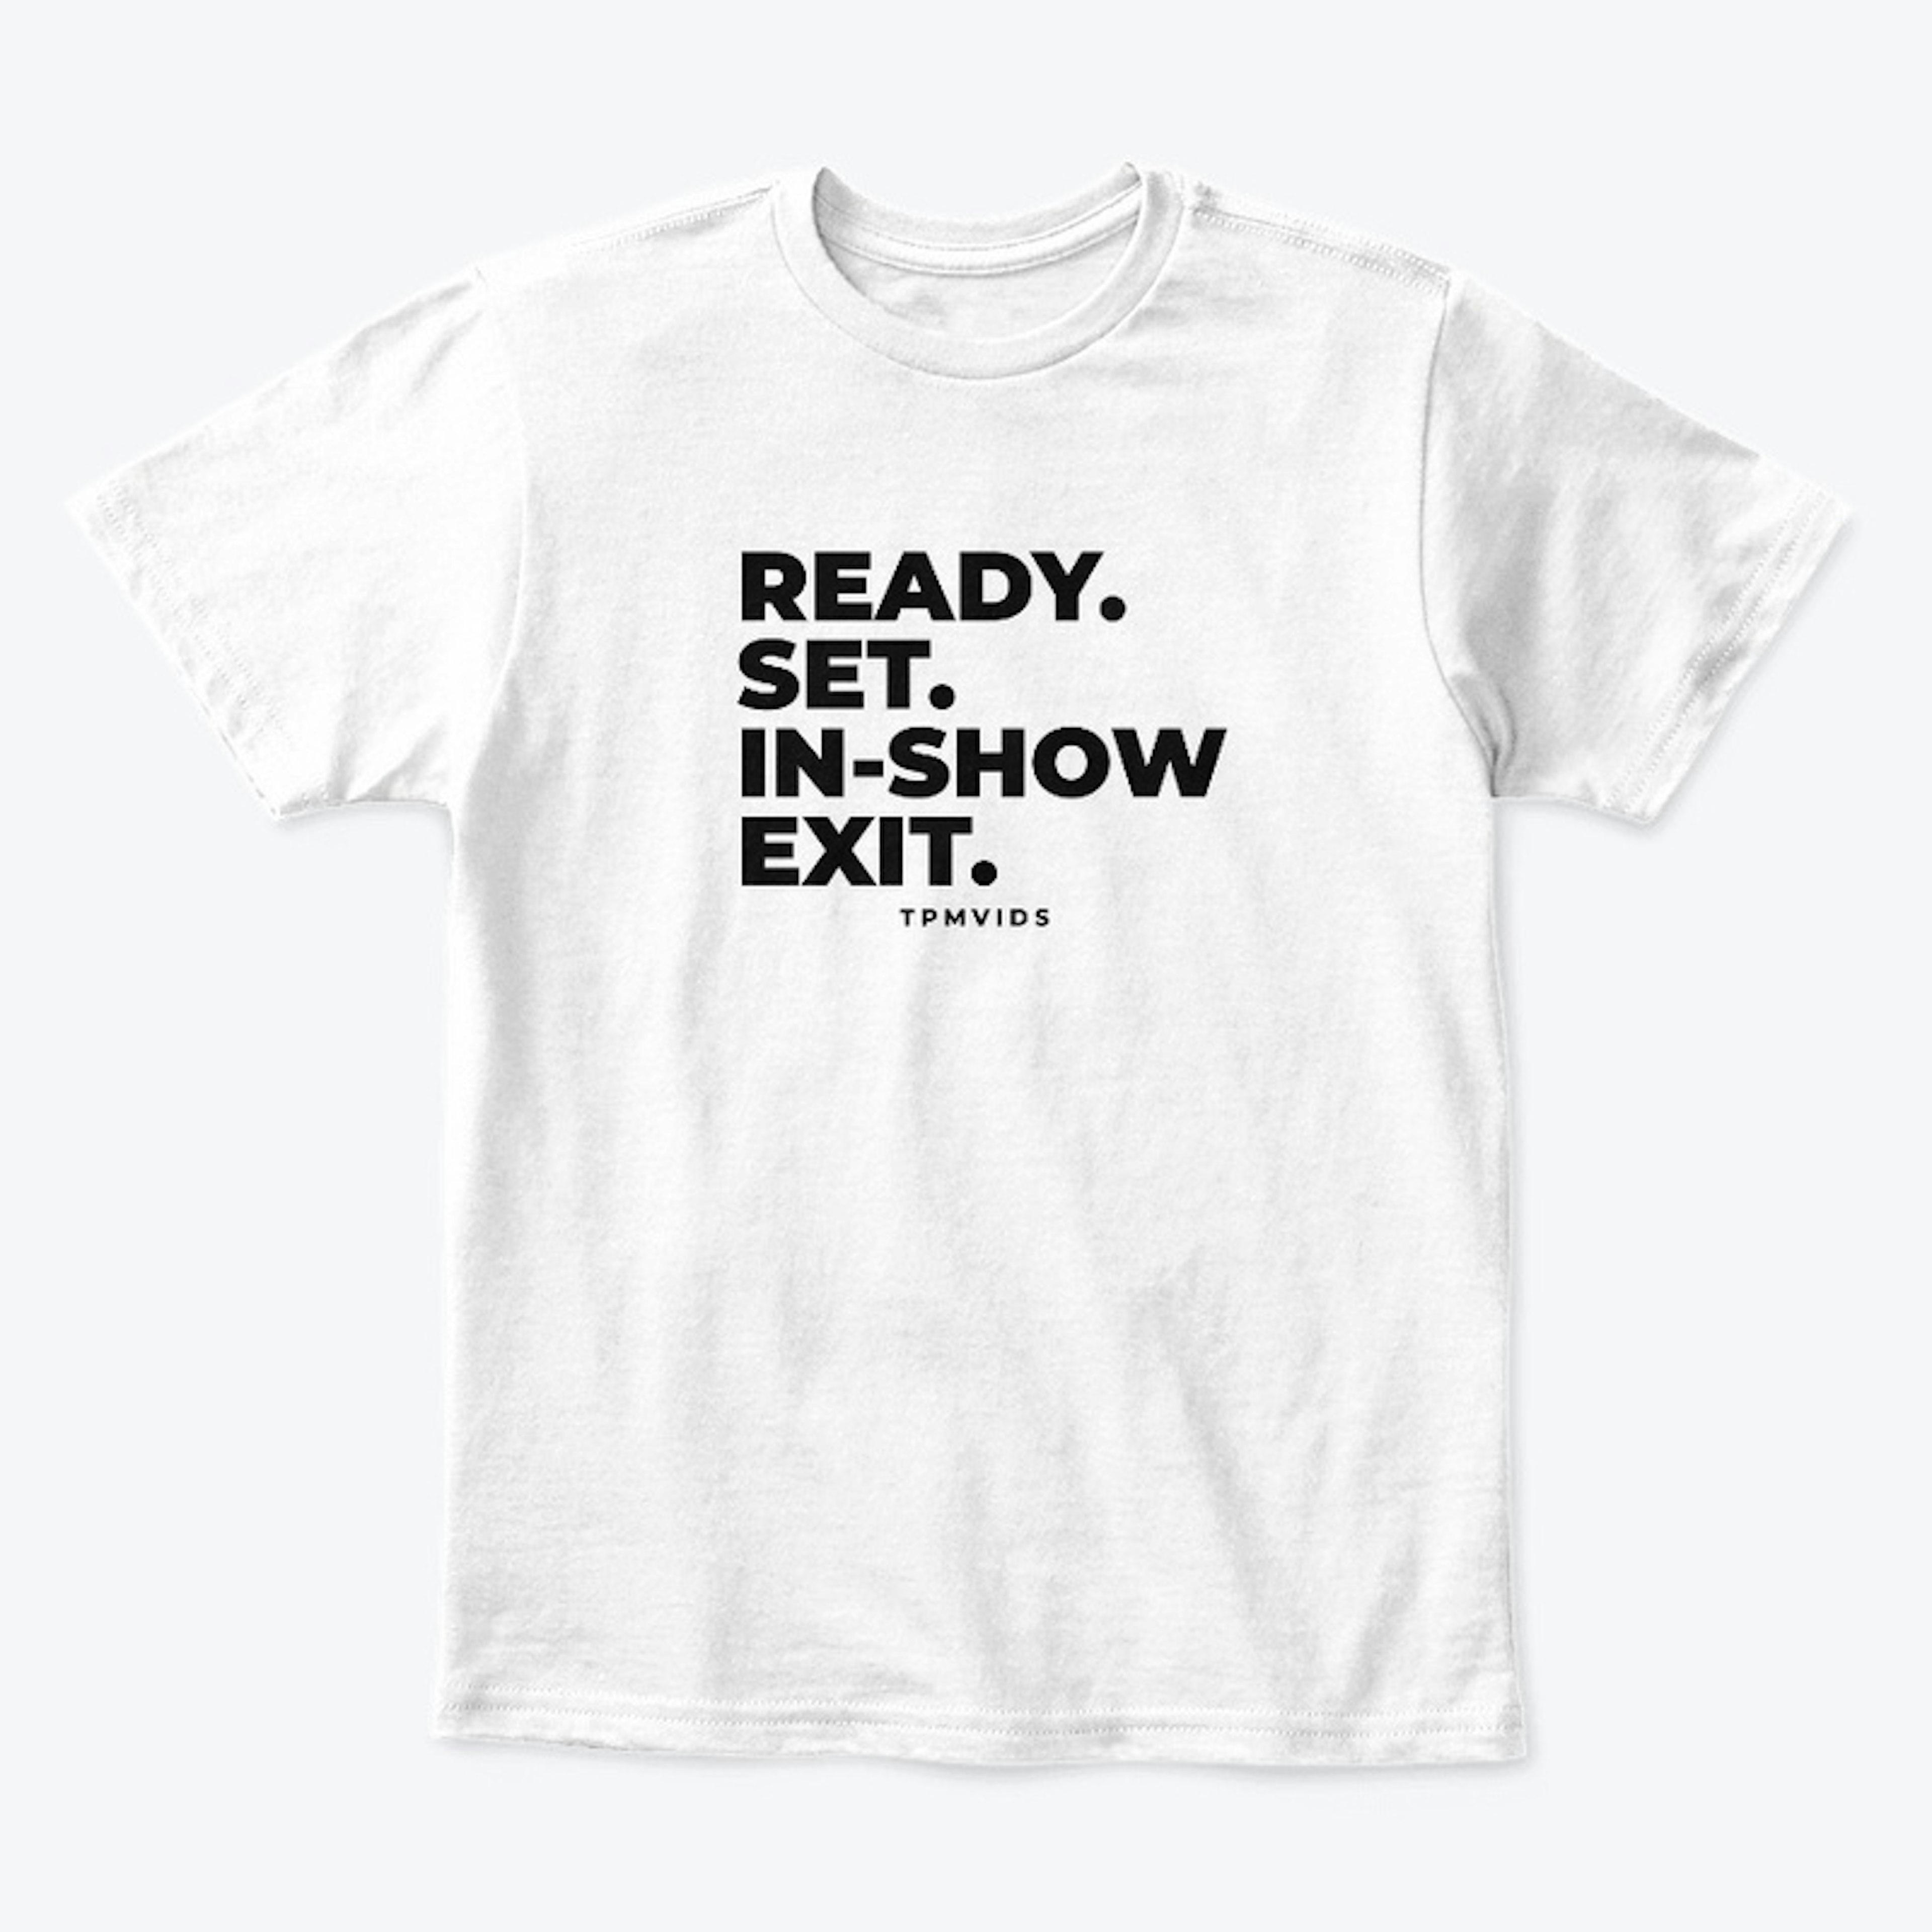 NEW- Ready. Set. In-Show Exit.